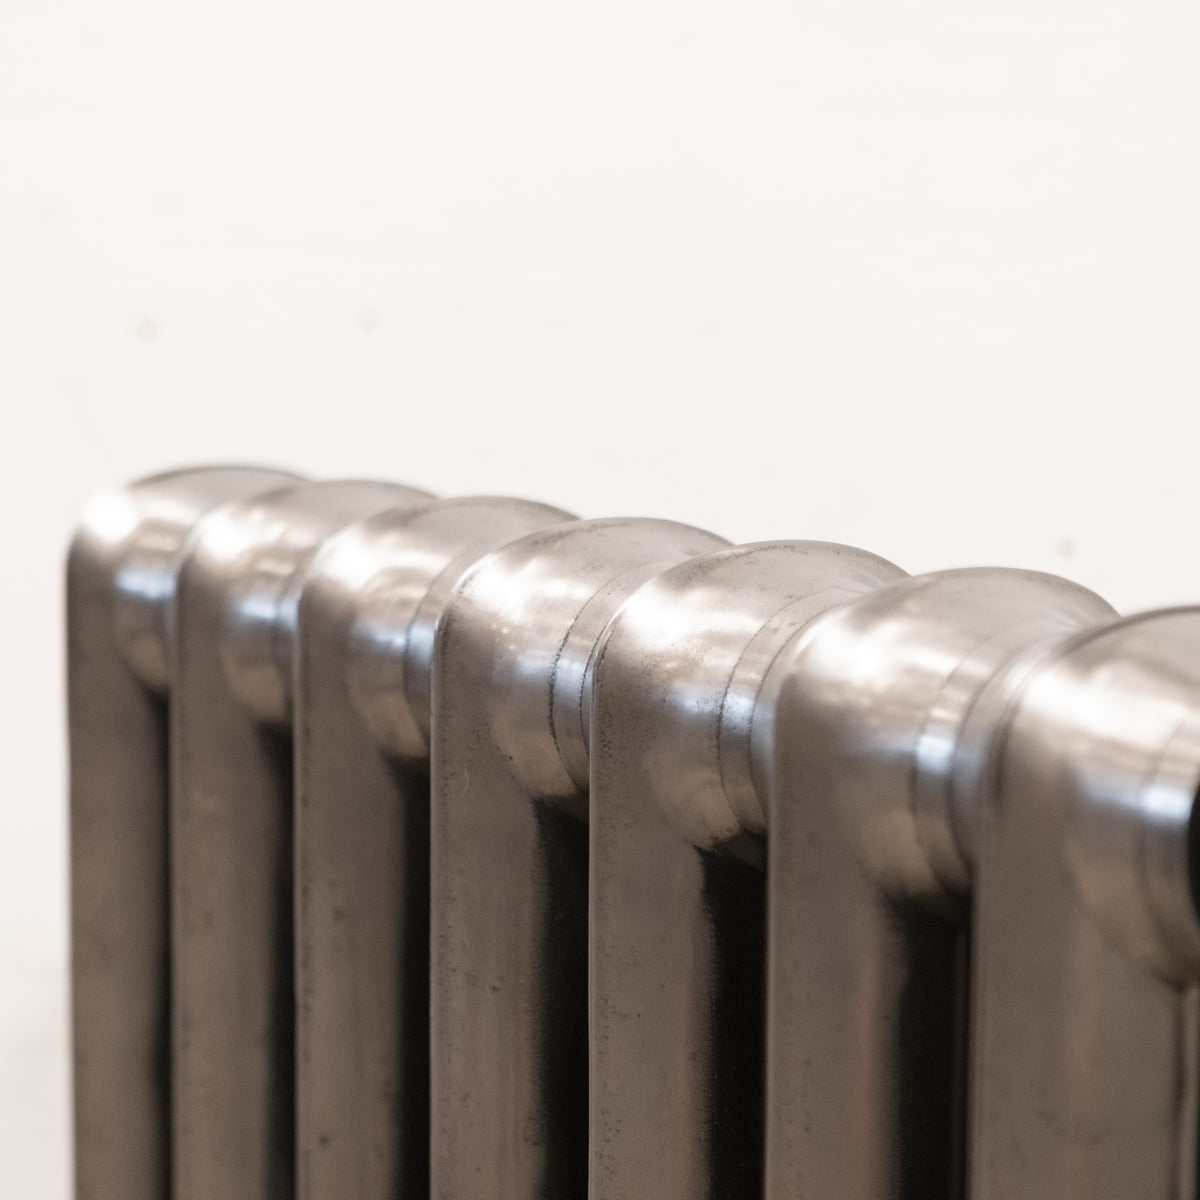 Fully Restored Cast Iron Two Column Radiator | Hand Polished Silver | The Architectural Forum